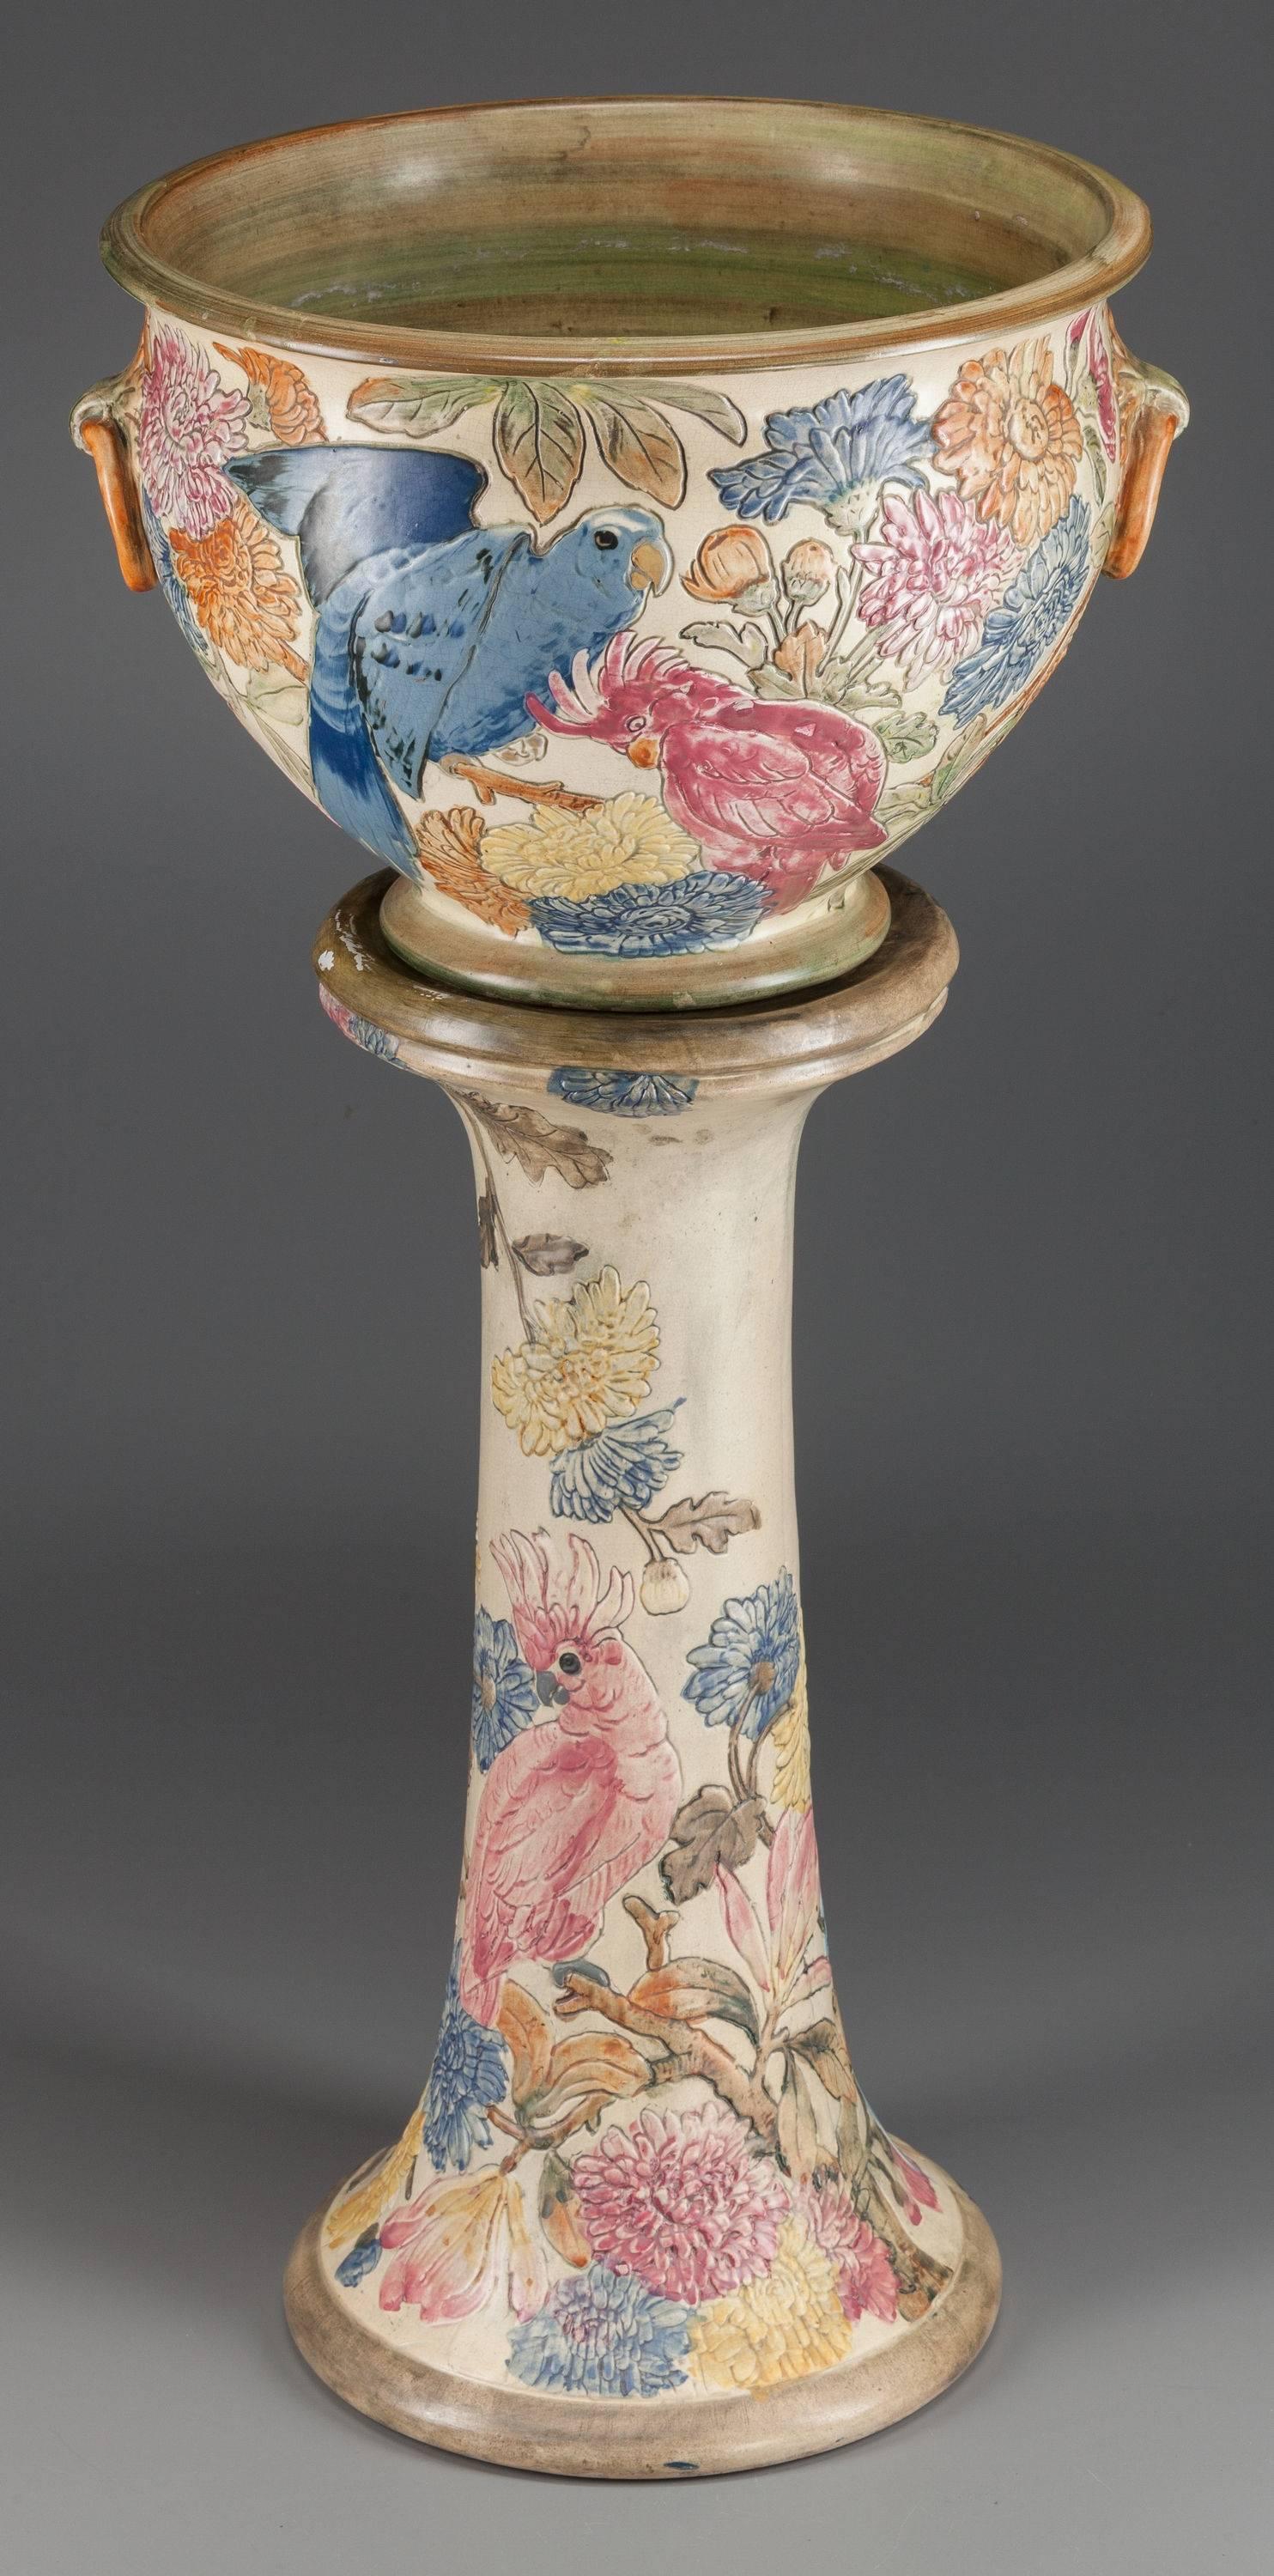 WELLER POTTERY PARROT JARDINIÈRE AND PEDESTAL, Decorated by Rudolph Lorber, Zanesville, Ohio, circa 1919 
Marks: A 
32 inches high (81.3 cm) (jardinière on pedestal) 
The jardinière and pedestal decorated with polychrome parrots among